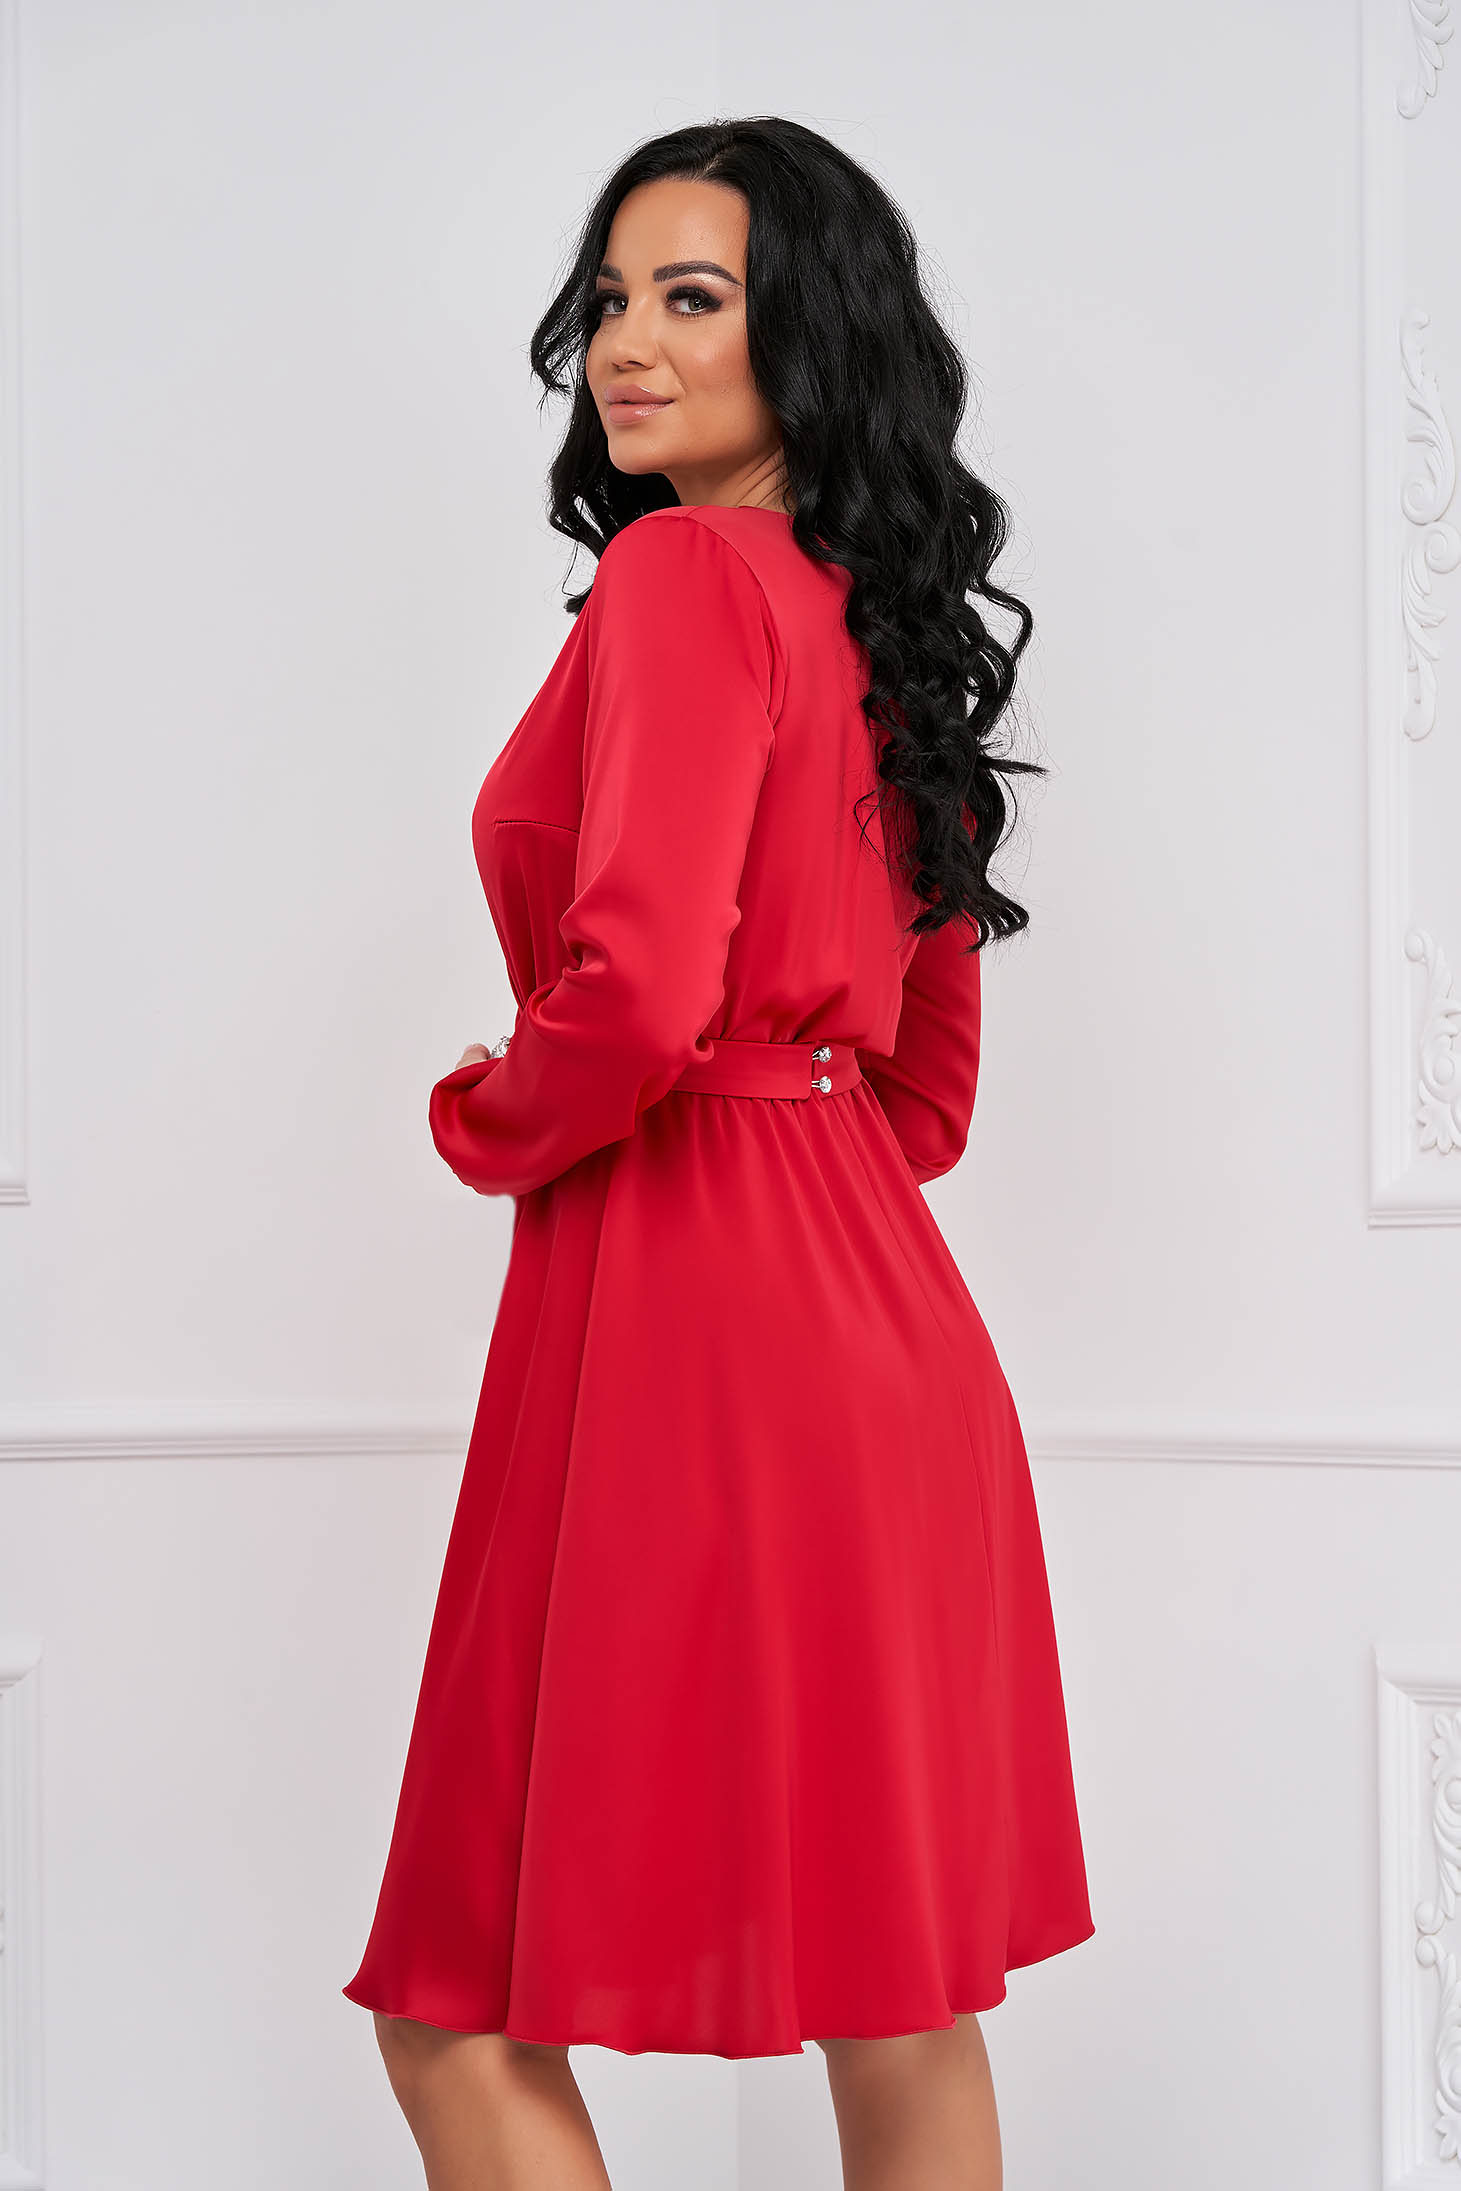 Red Satin Short A-Line Dress with Wrap Over Neckline - StarShinerS 2 - StarShinerS.com